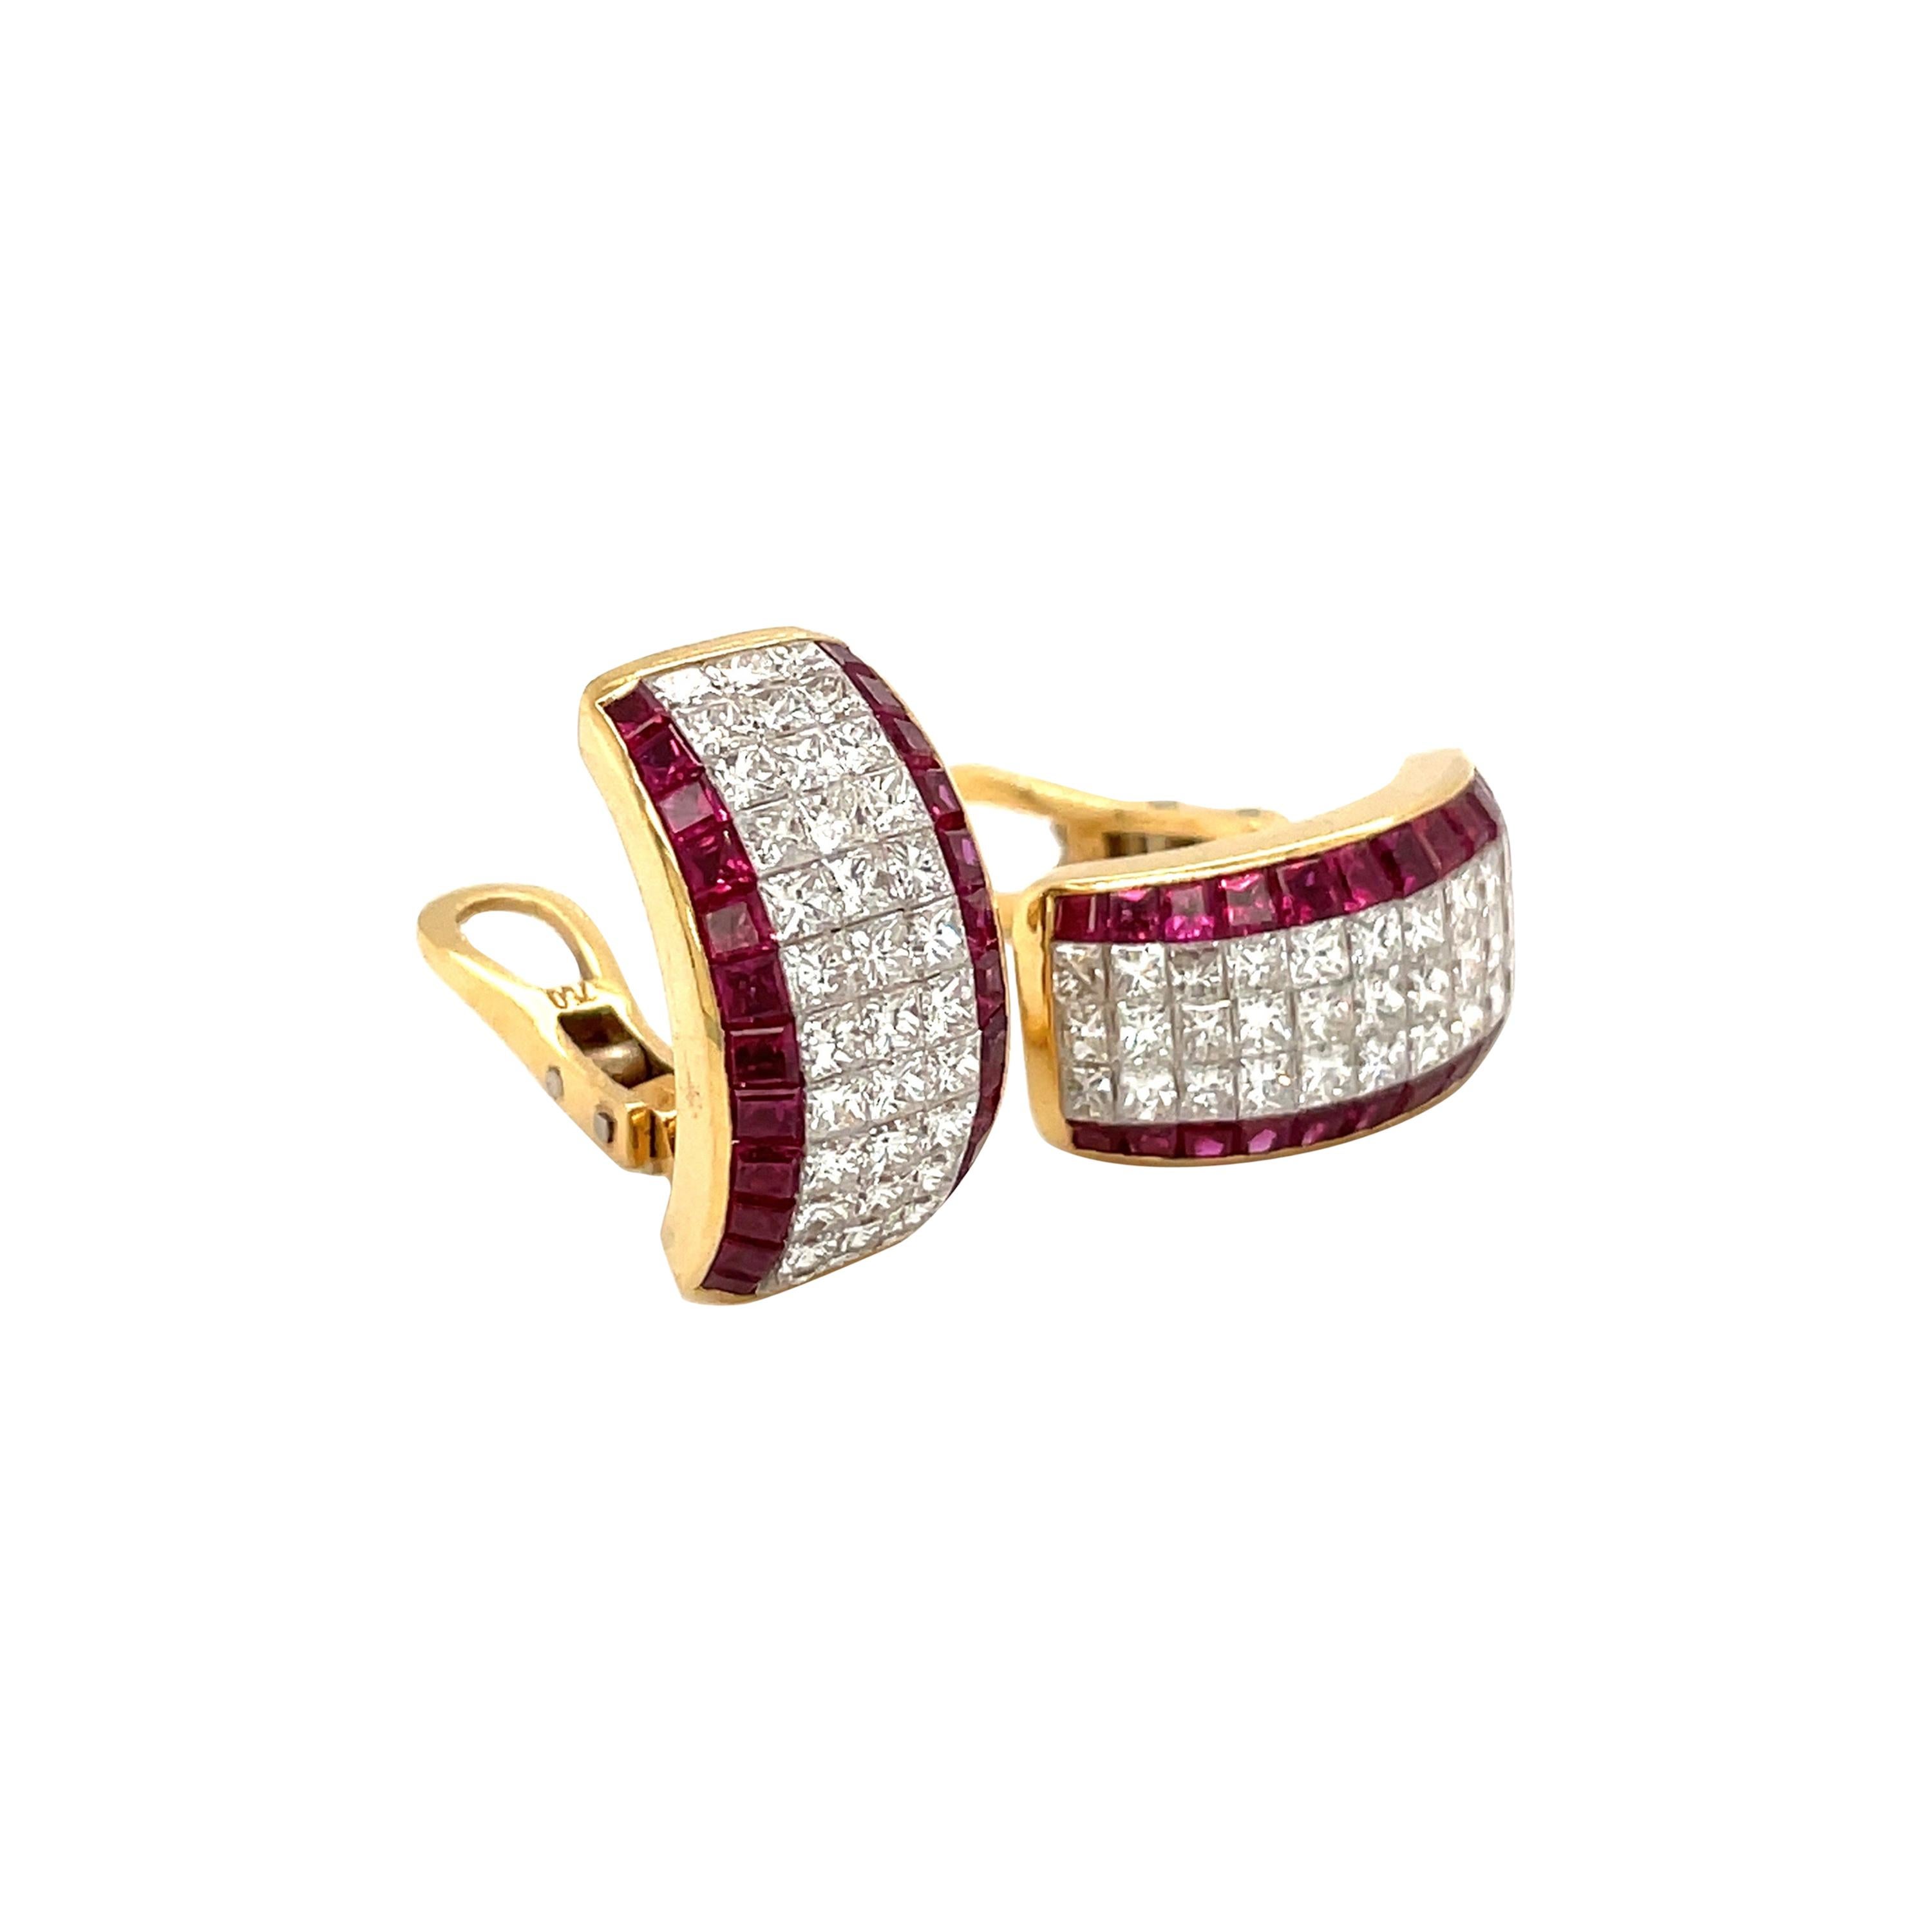 Cellini 18kt Yellow Gold Invisibly Set 6.85ct. Ruby & 3.69ct. Diamond Earrings